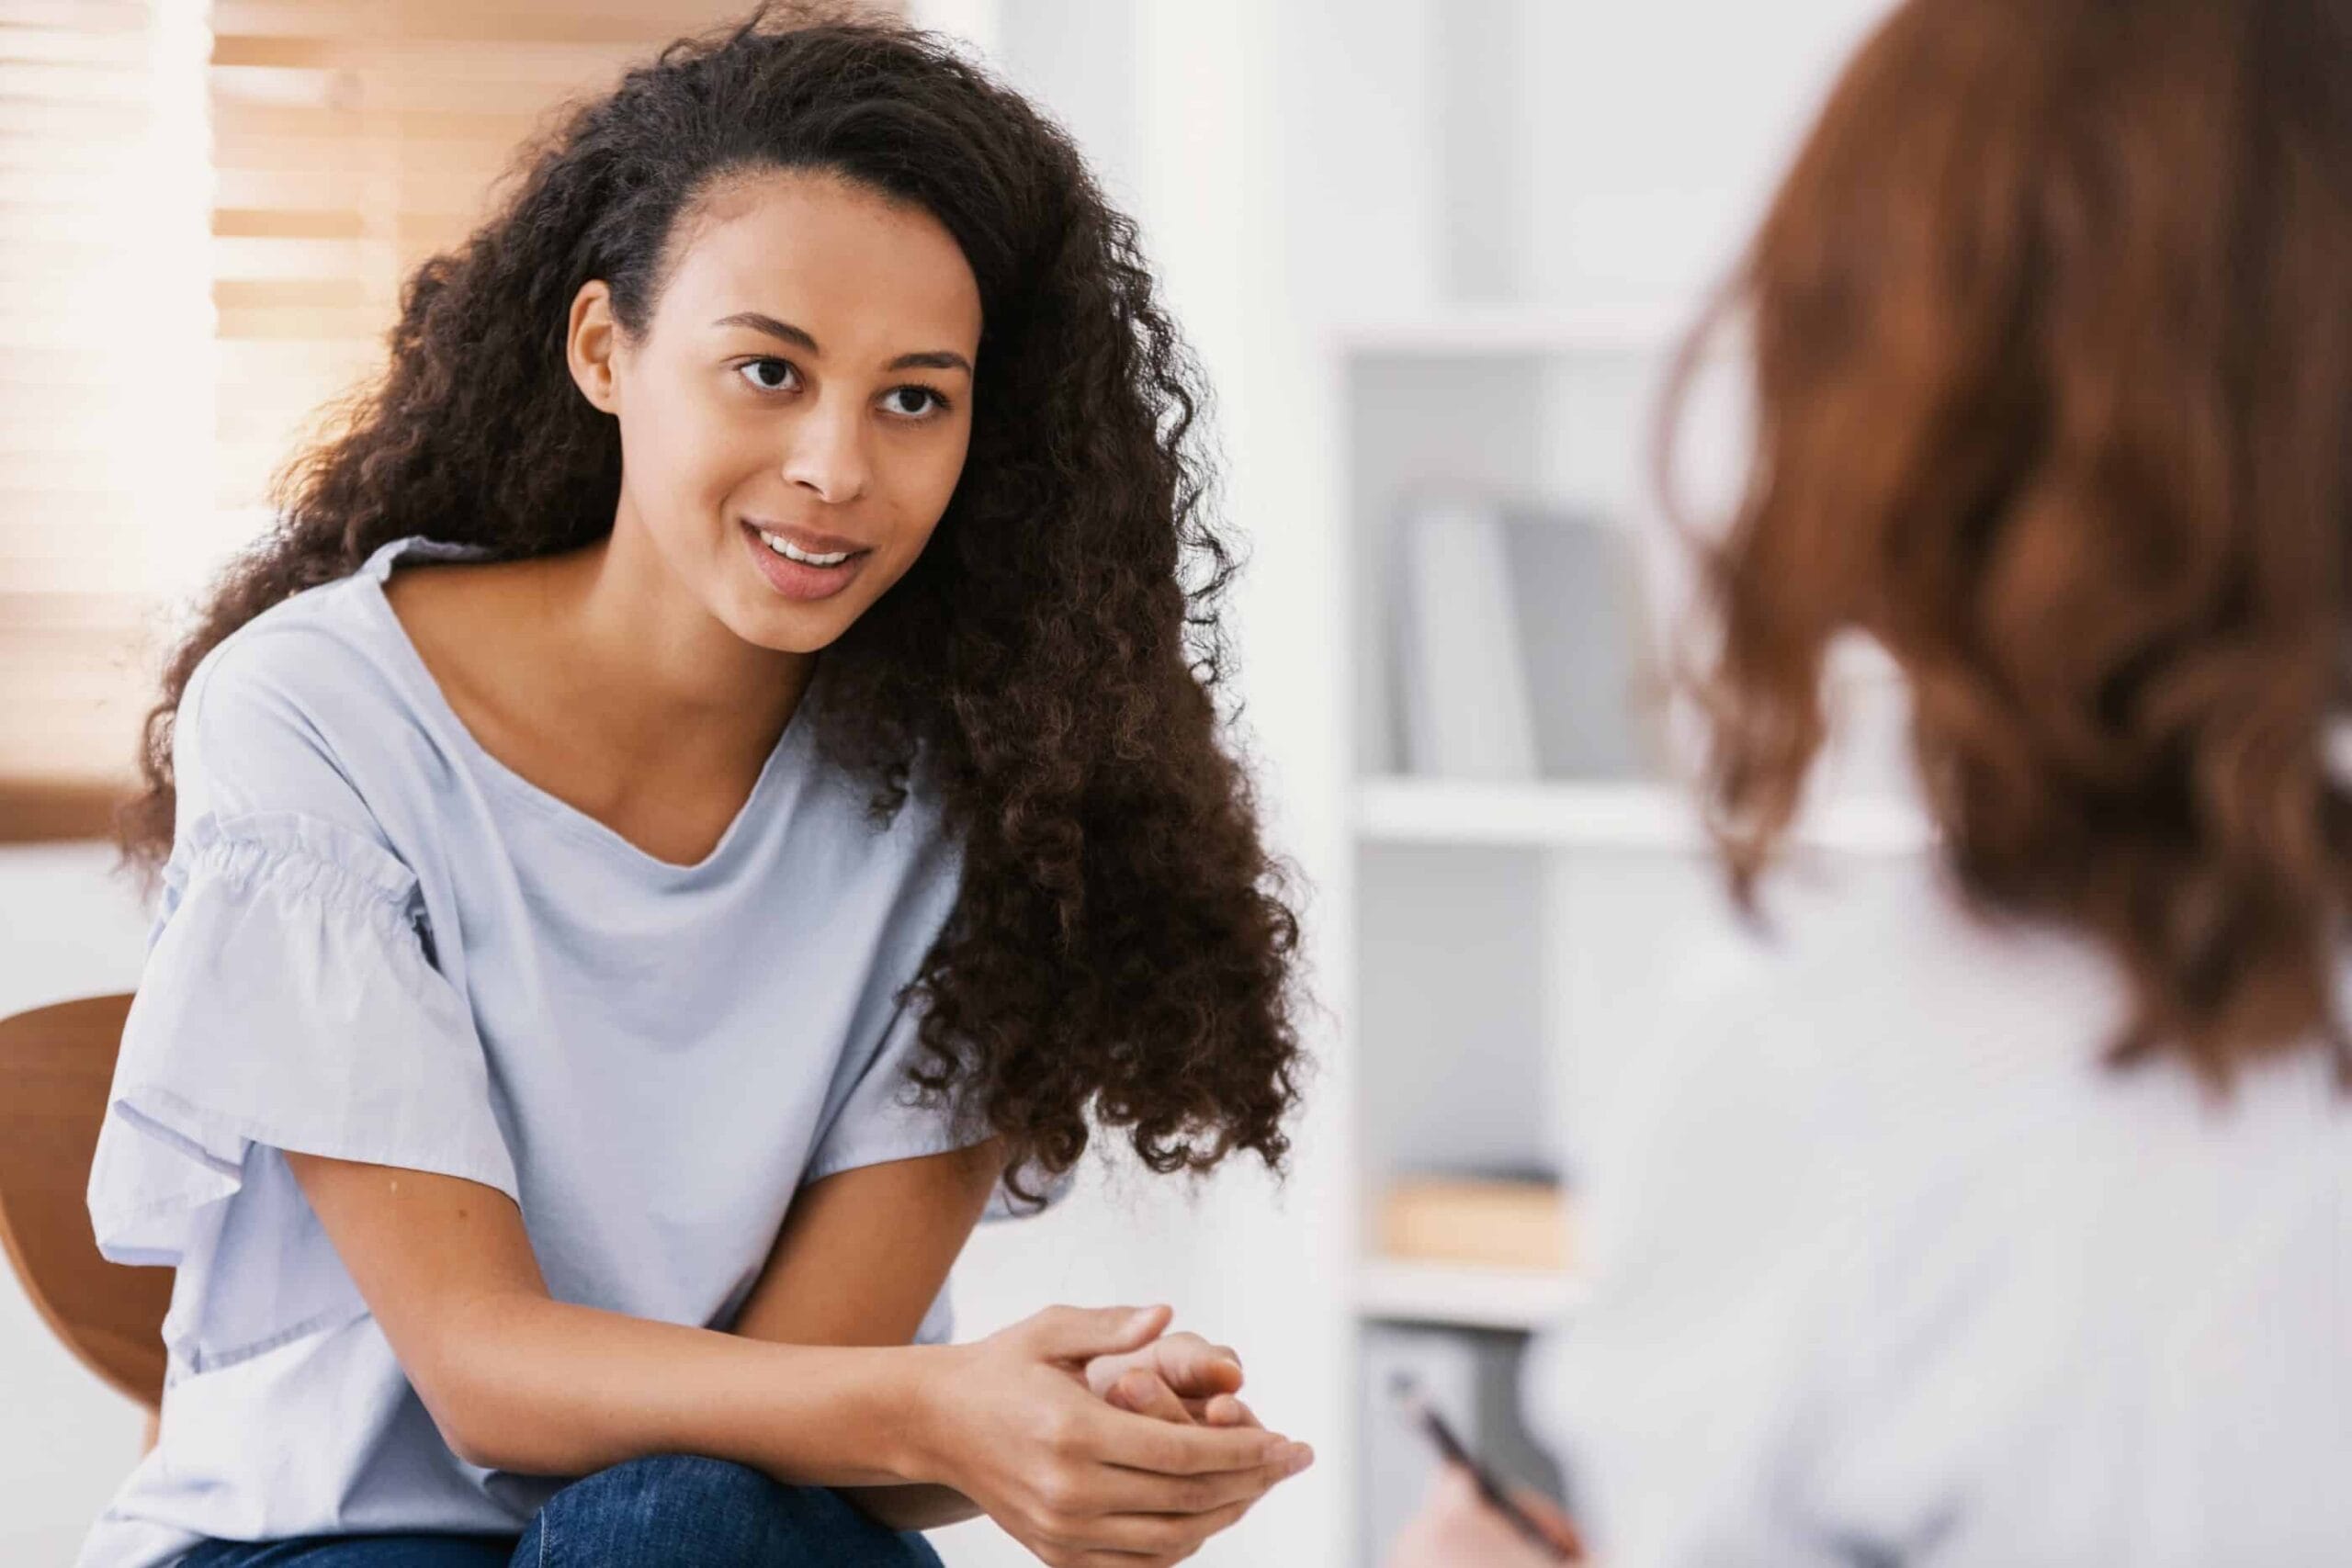 Woman getting the best help at our mood disorder treatment in Los Angeles, California